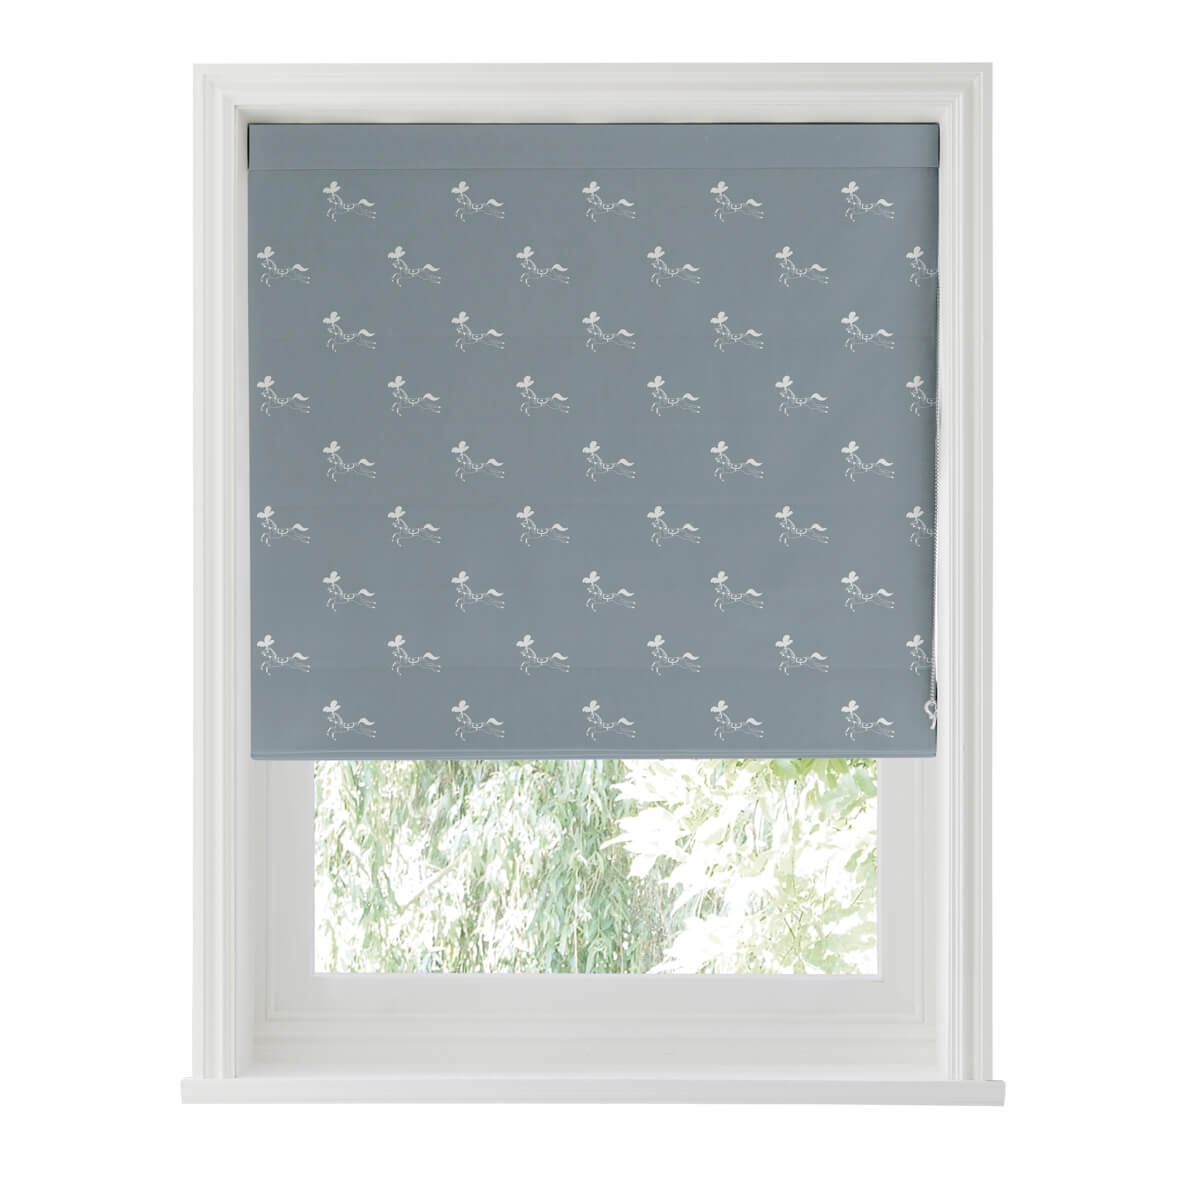 Fairground Ponies Teal Made to Measure Roman Blind